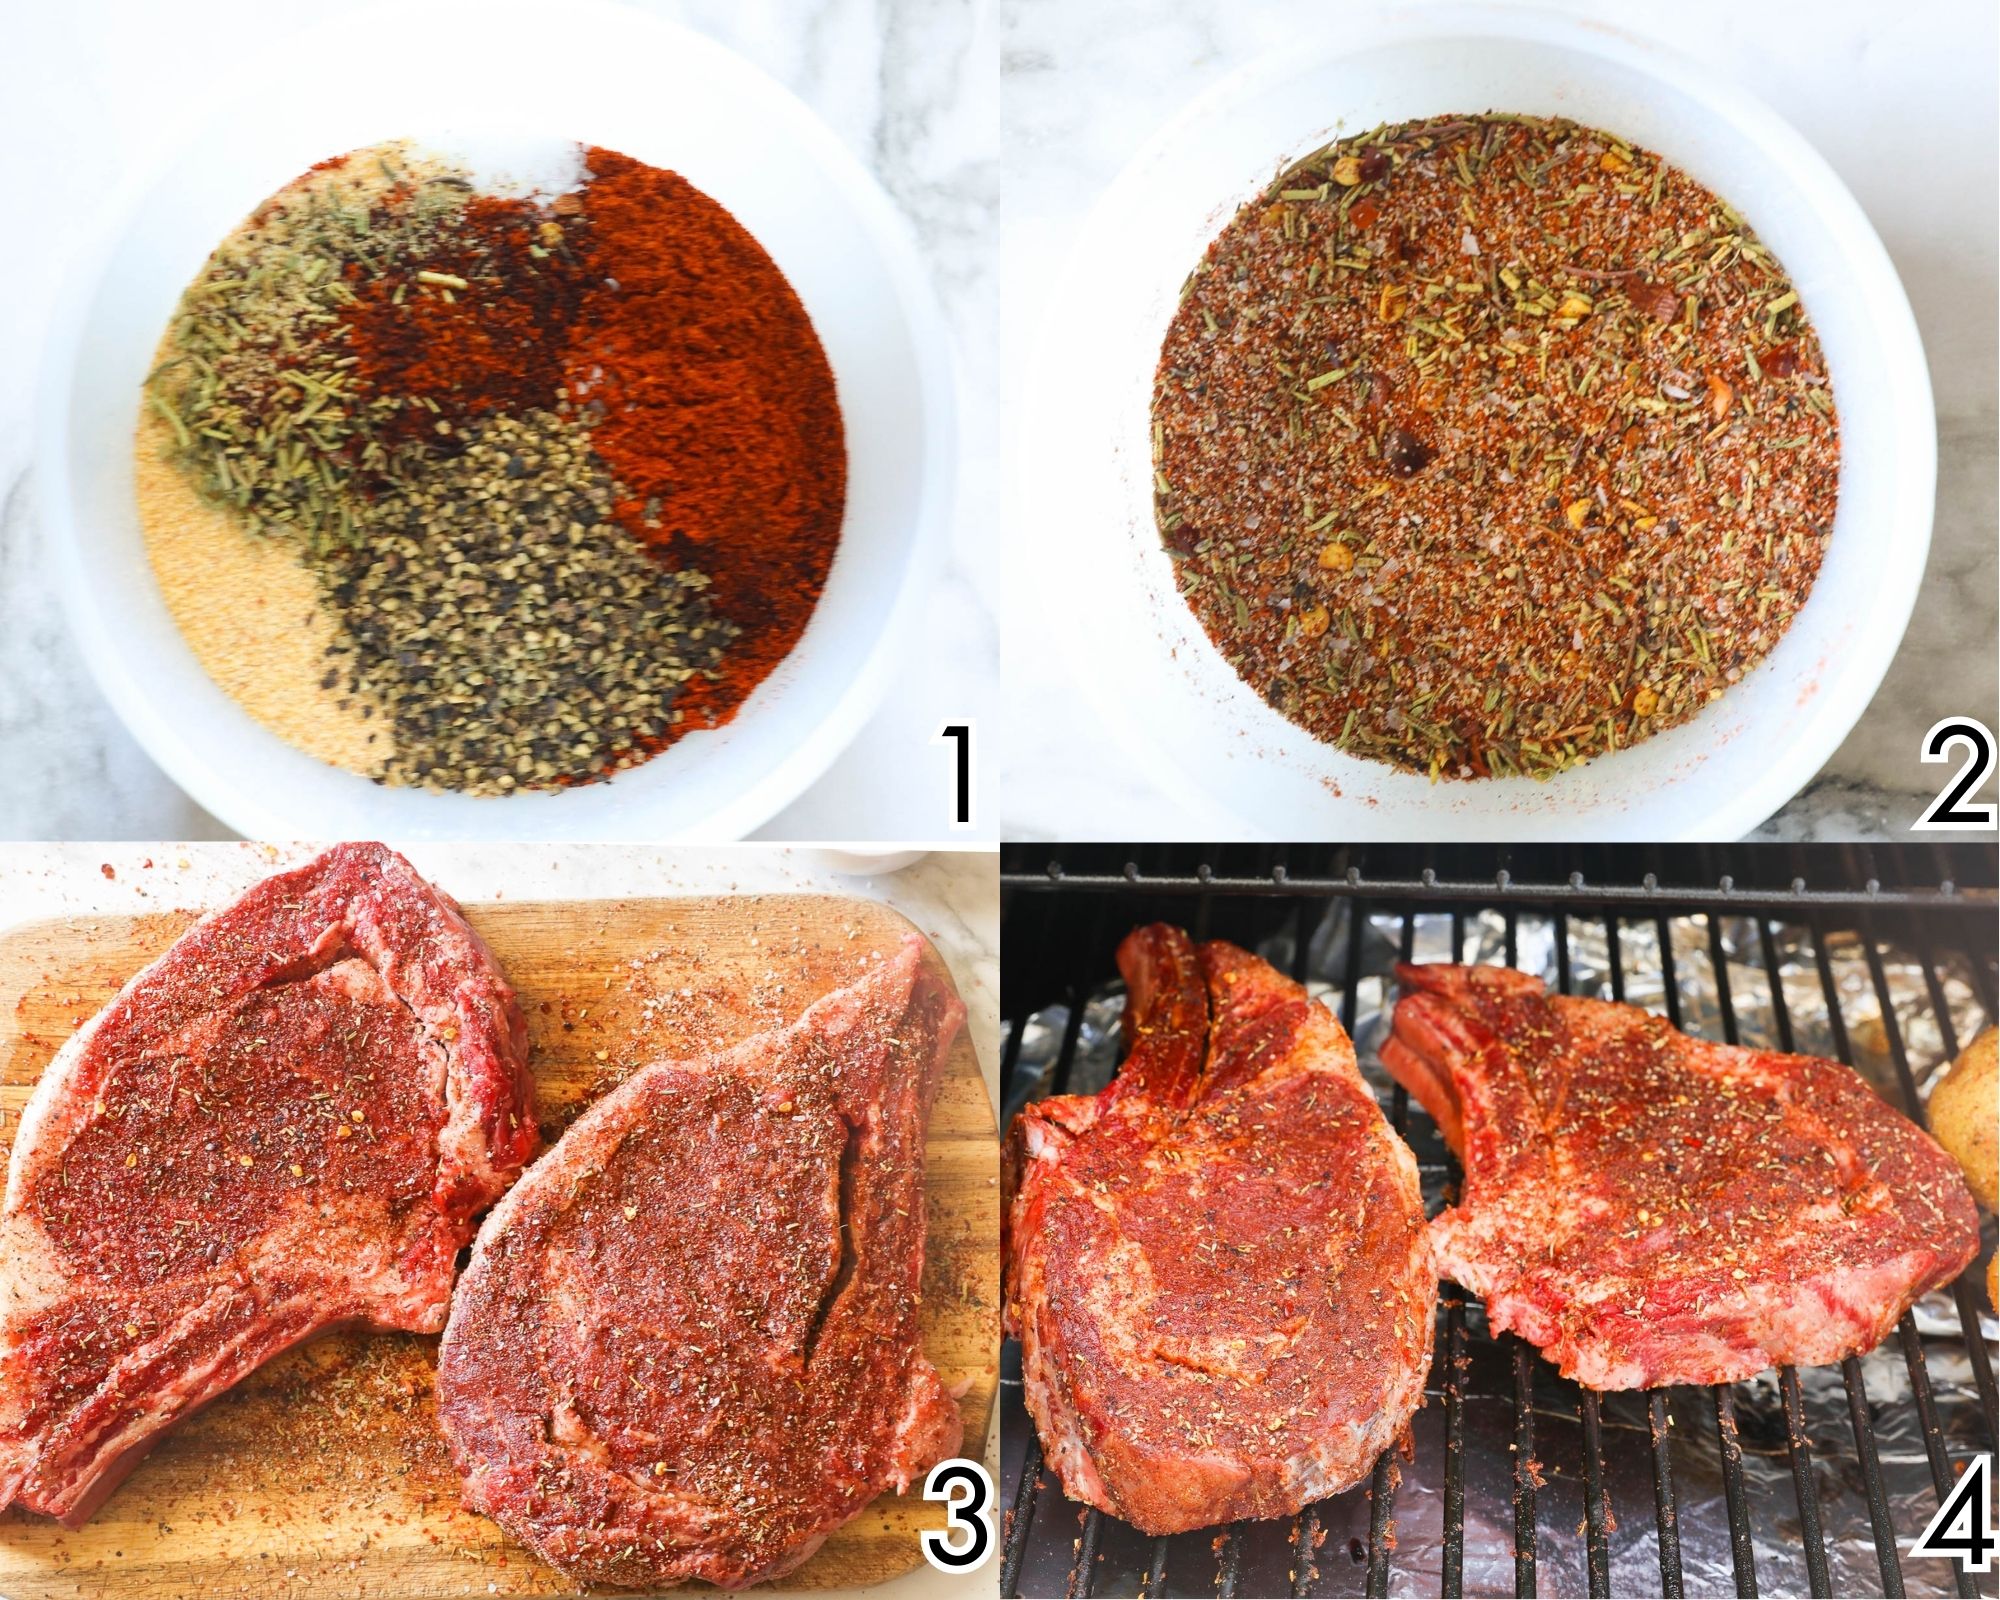 Preparing dry rub, apply to meat, place on grill